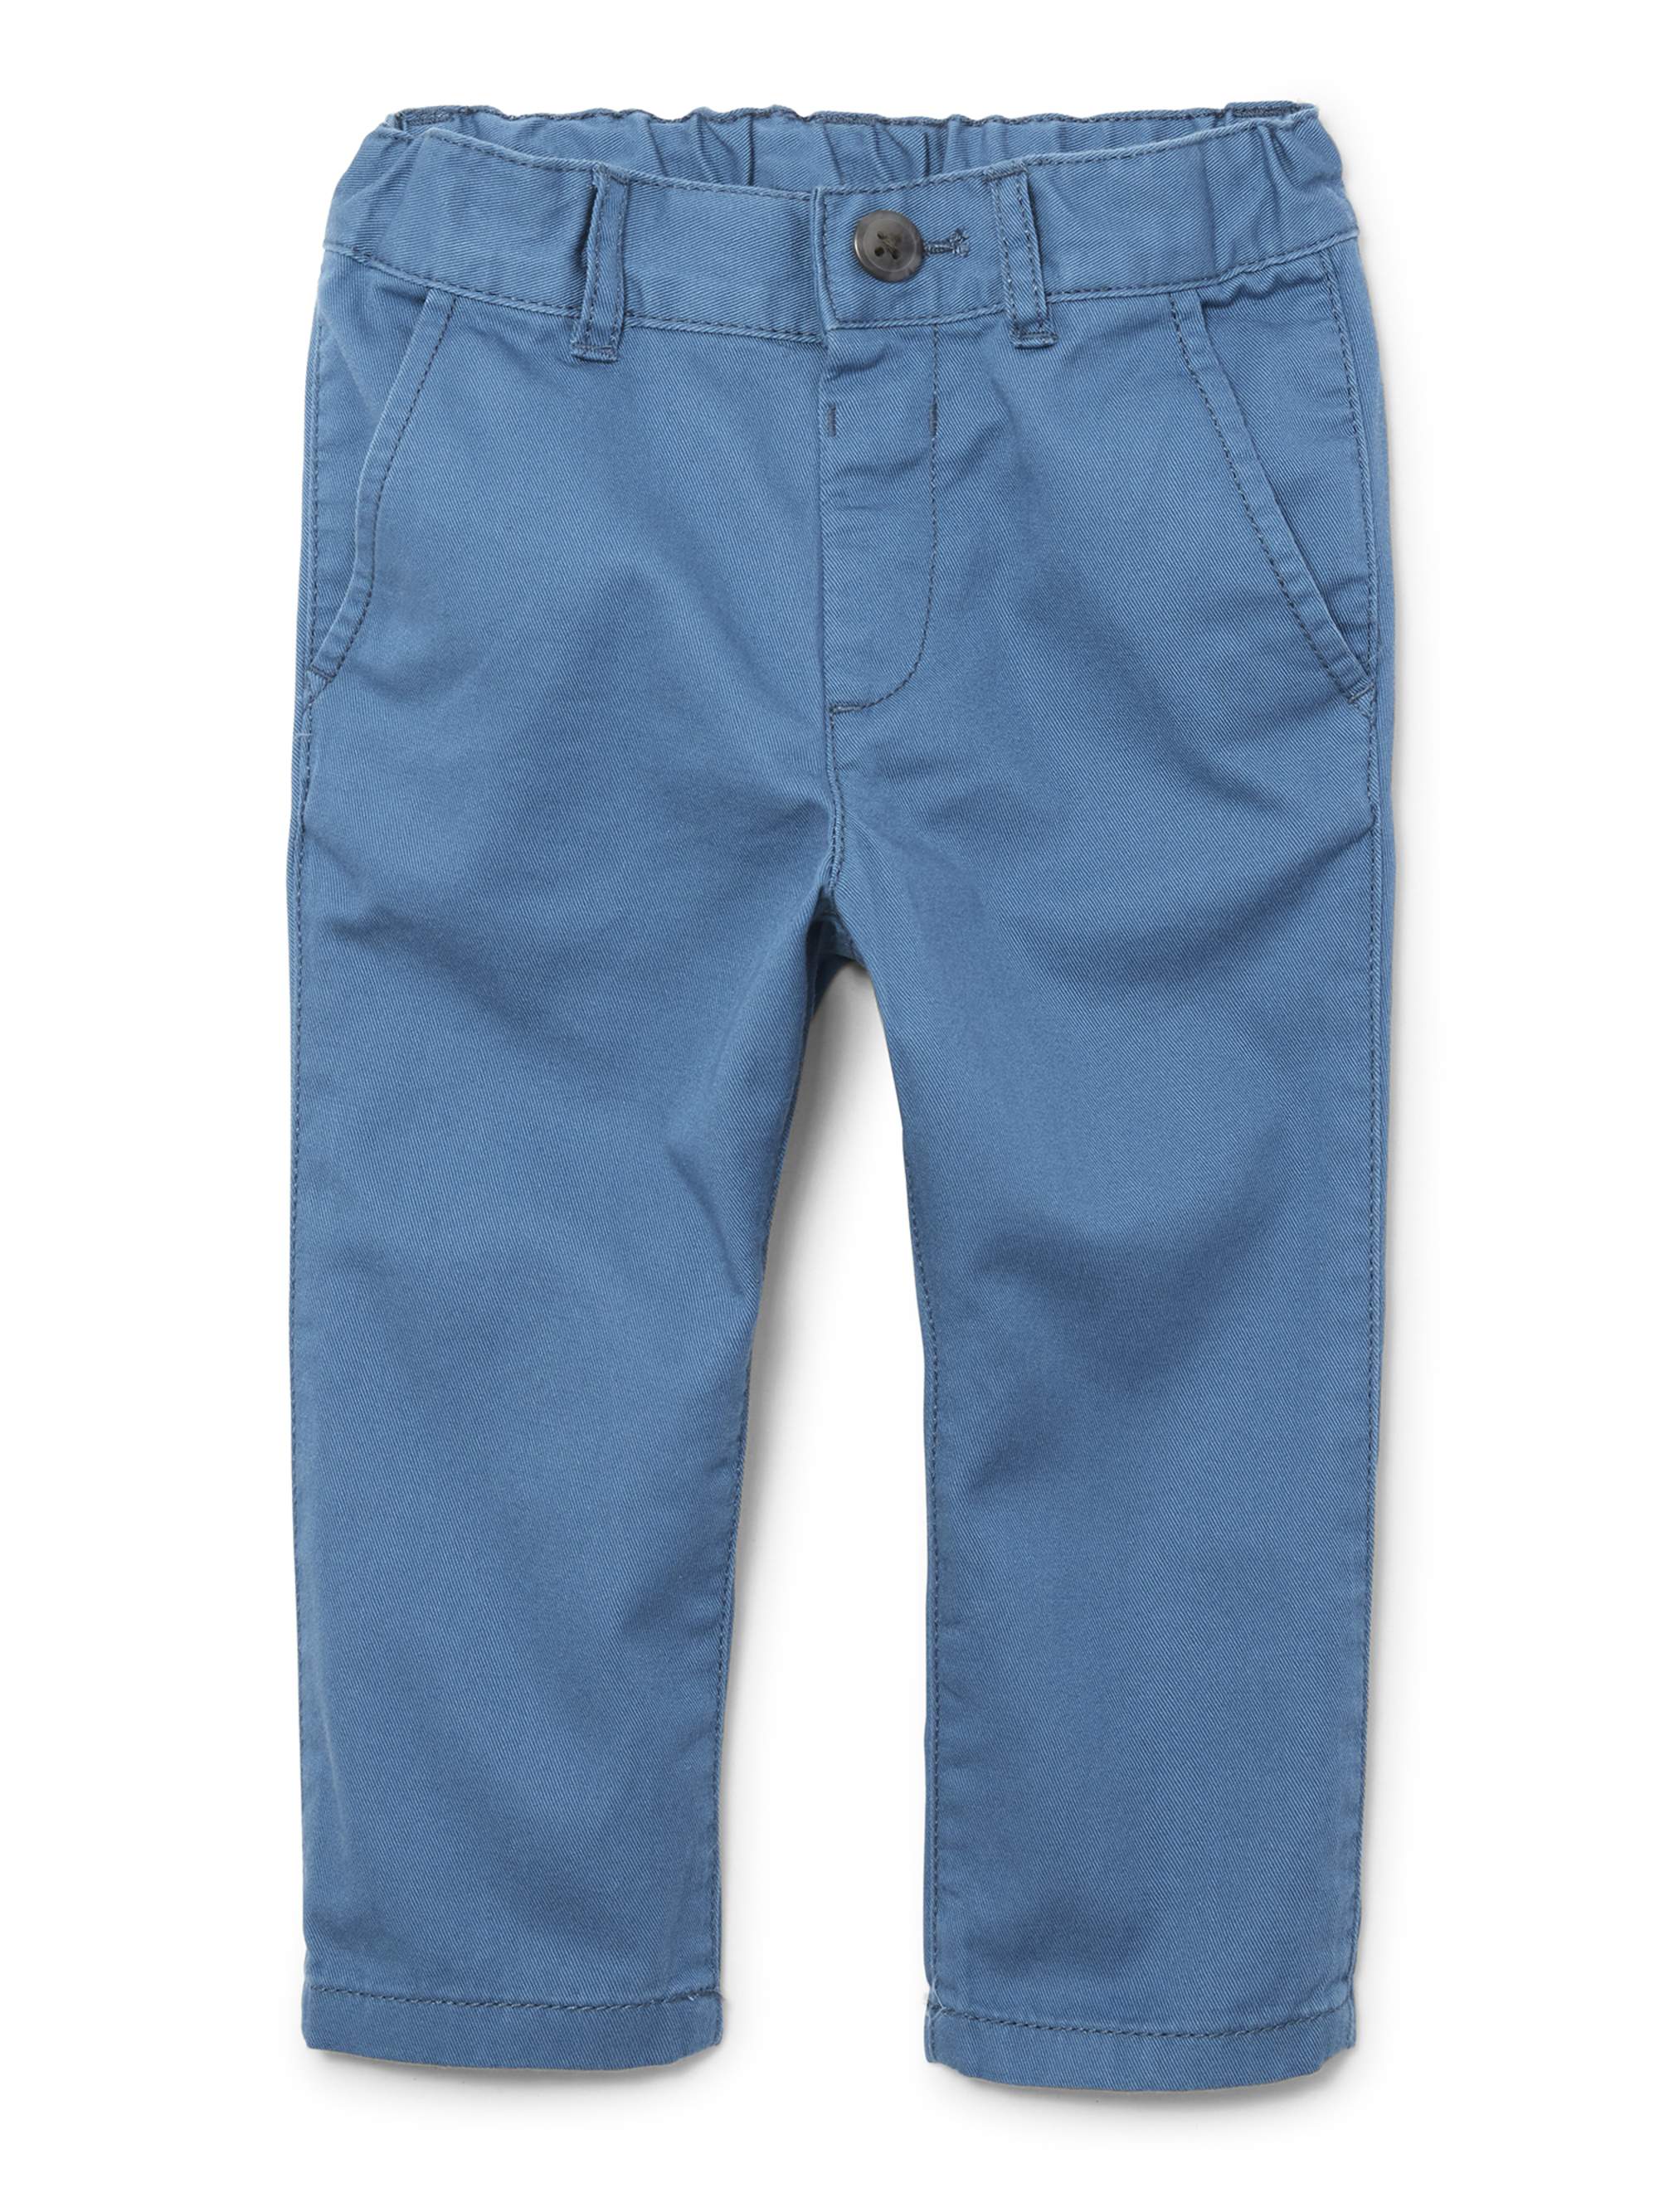 The Childrens Place Baby Boys Skinny Chino Pants